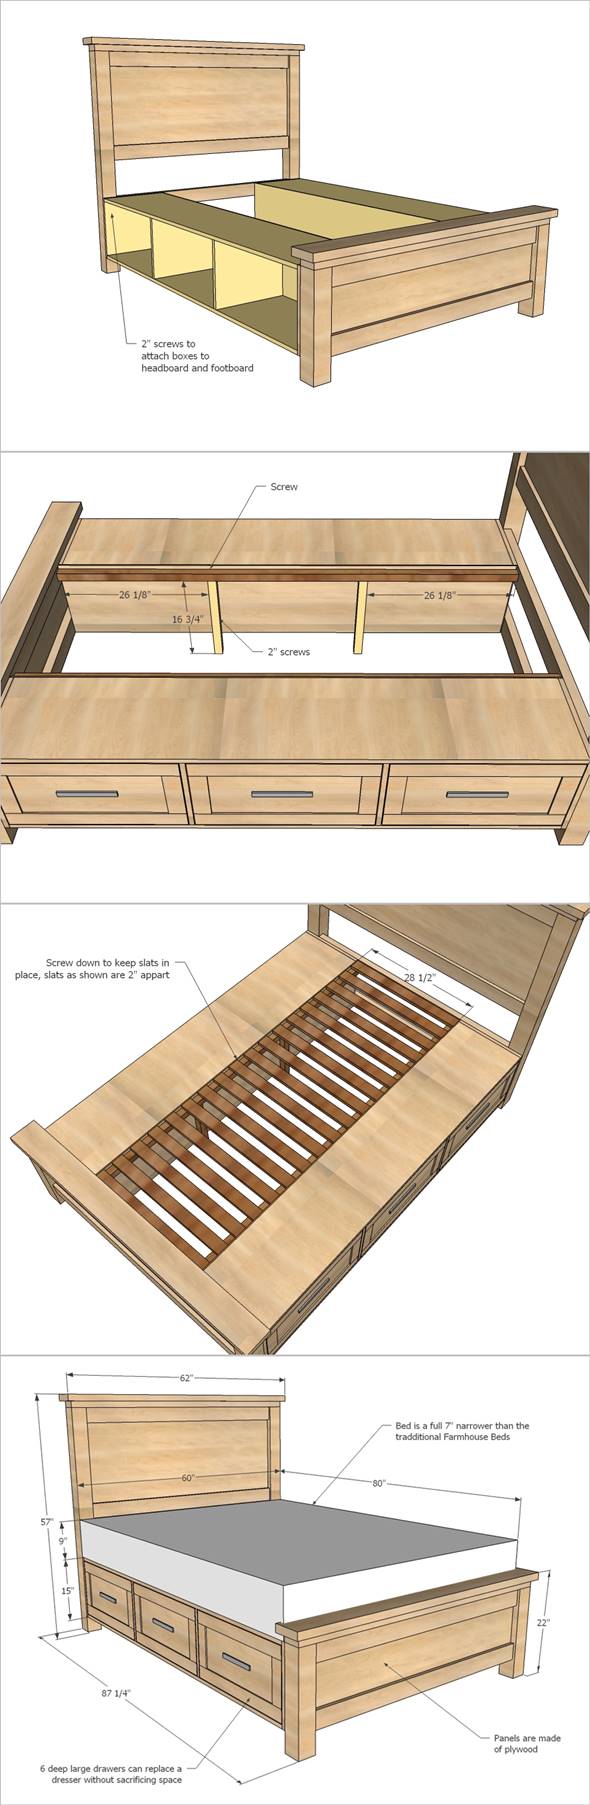 How To Build A Farmhouse Storage Bed with Drawers